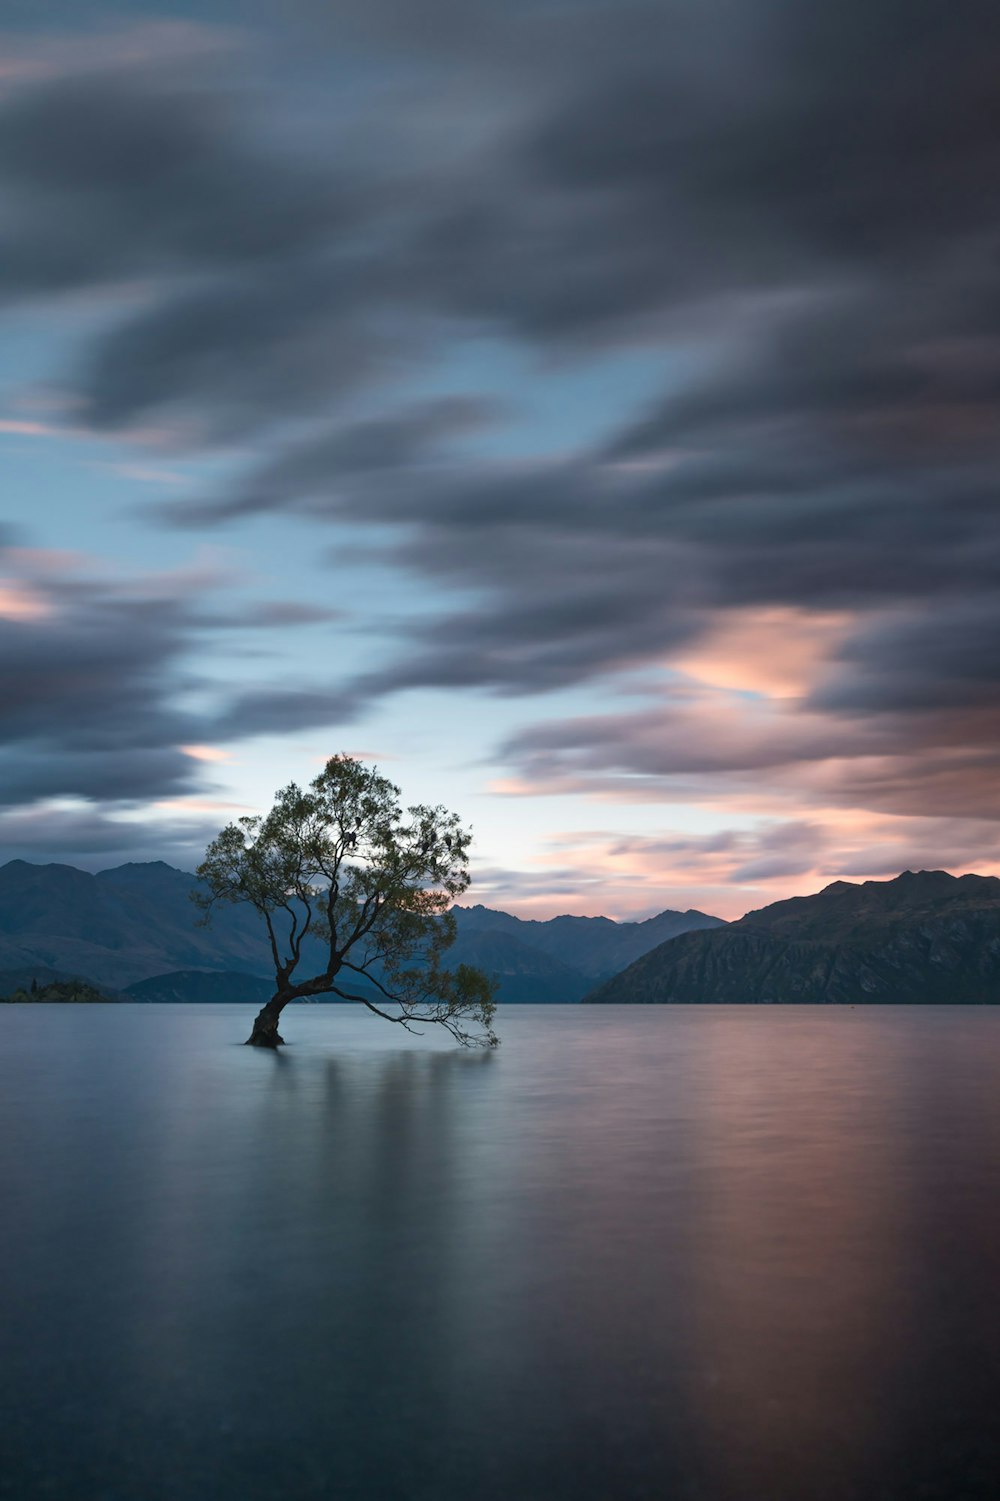 tree on body of water under cloudy sky during daytime